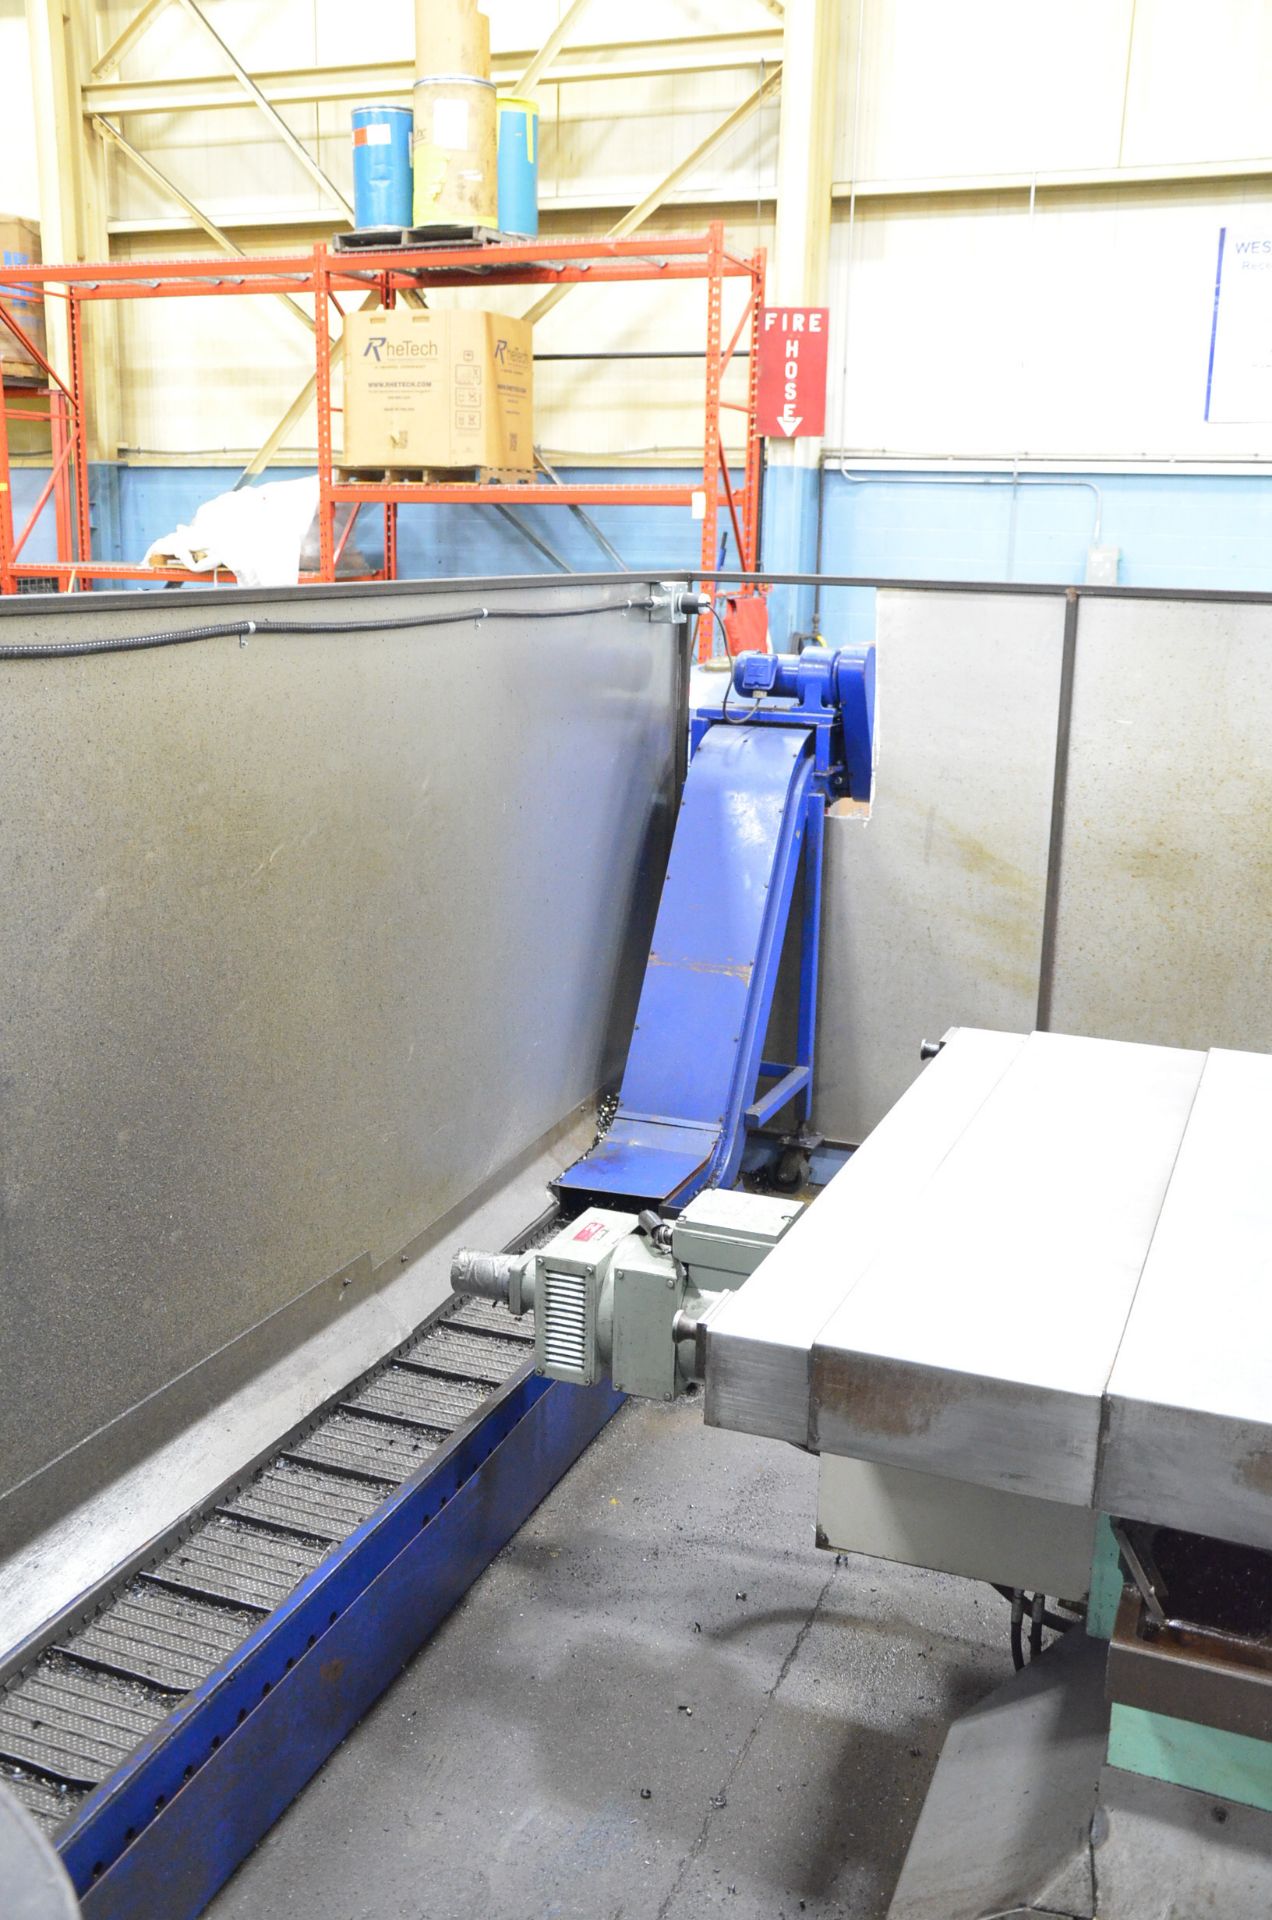 TOS WHN-13-4-A TABLE-TYPE HORIZONTAL BORING MILL WITH 5" SPINDLE, 63"X70.5" T-SLOT ROTARY TABLE, - Image 10 of 10